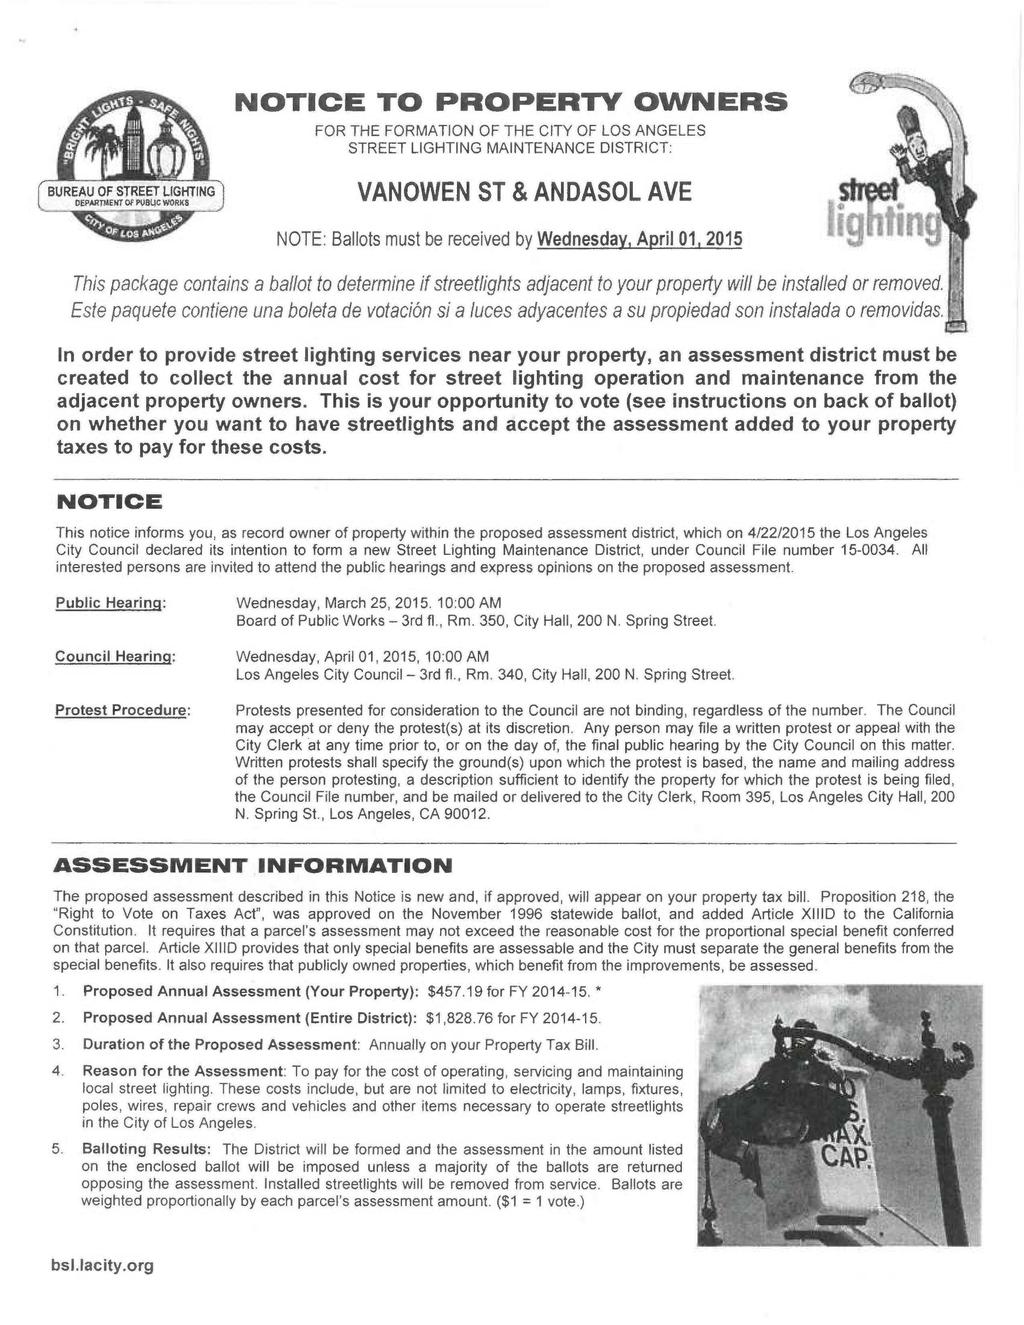 NOTCE TO PROPERTY OWNERS FOR THE FORMATON OF THE CTY OF LOS ANGELES STREET LGHTNG MANTENANCE DSTRCT: VANOWEN ST & ANDASOL AVE NOTE: Ballots must be received by Wednesday, April 01, 2015 This package